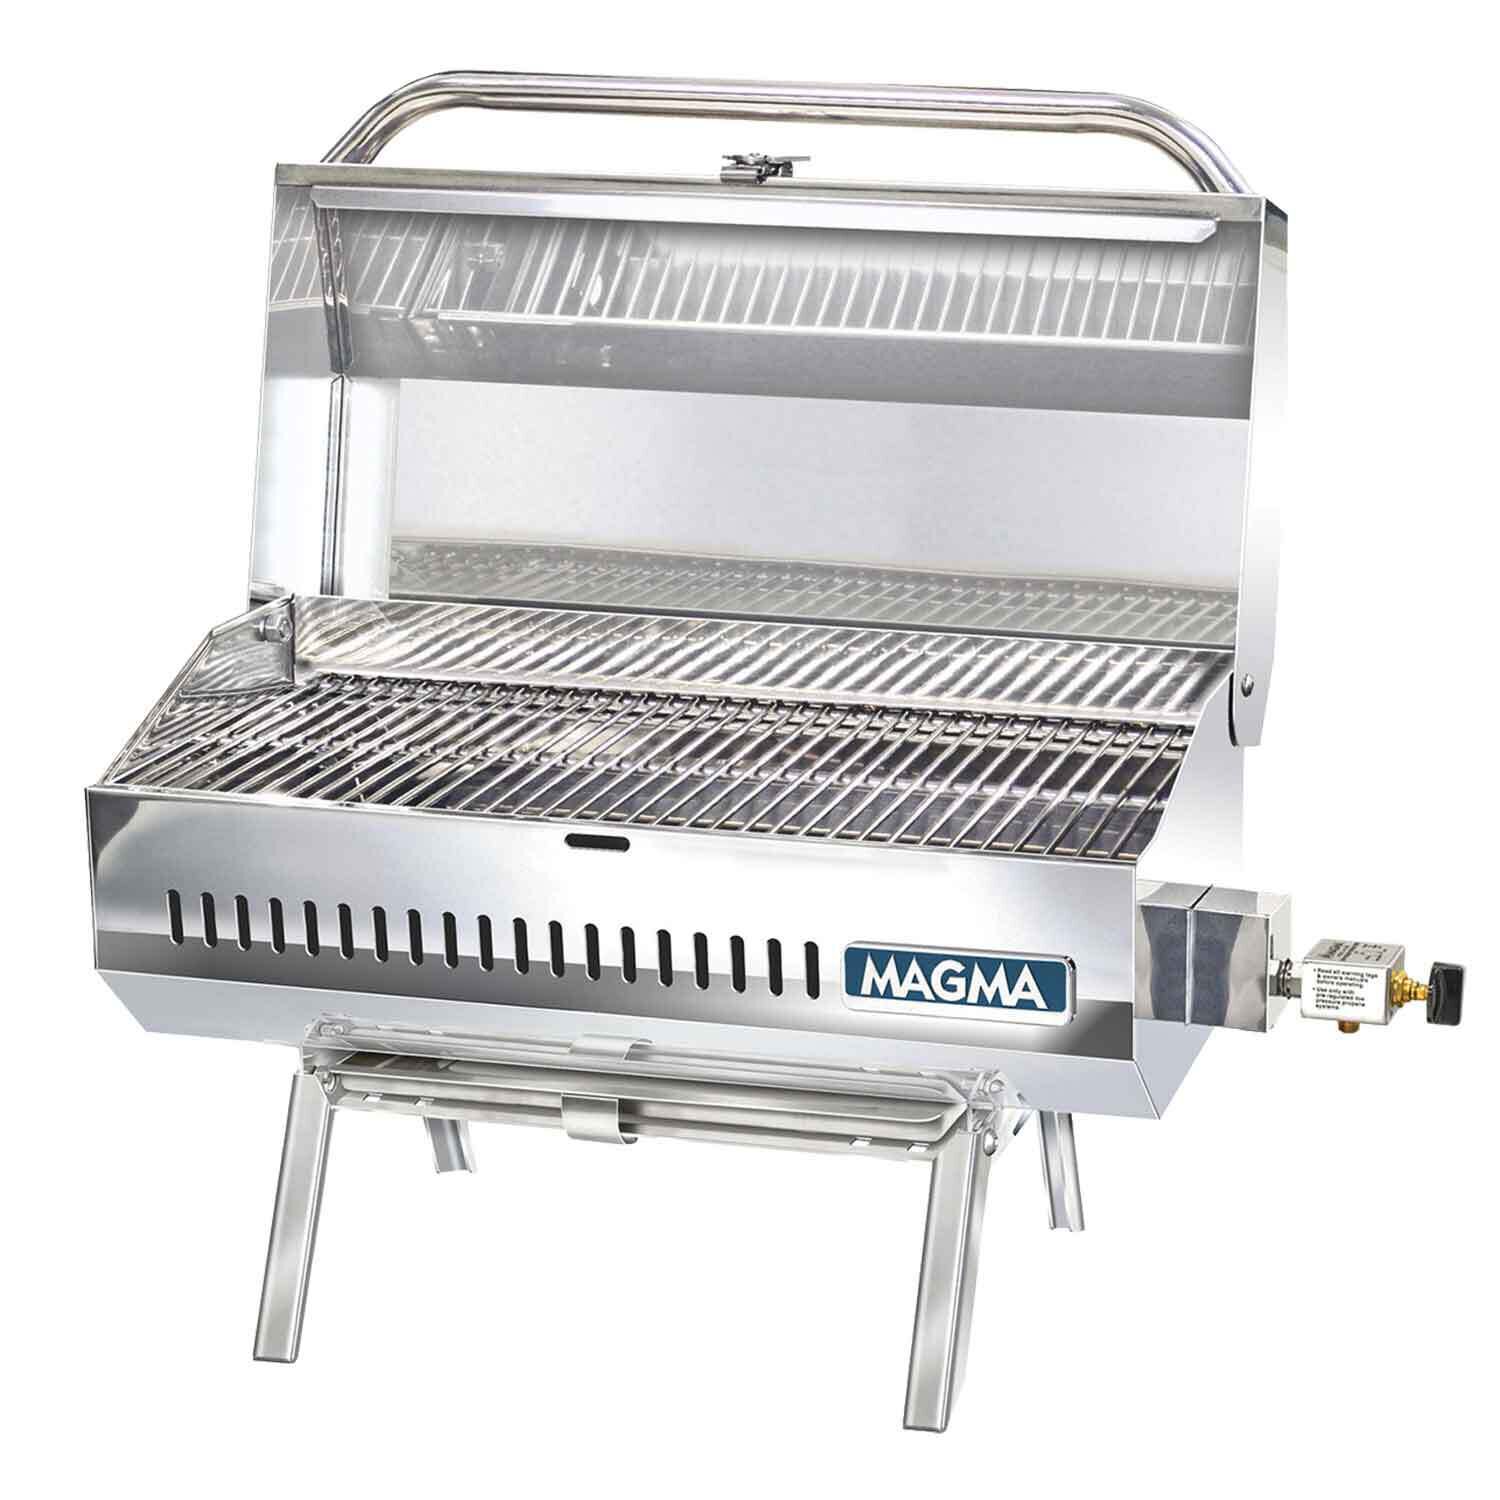 Boat BBQ Stainless Steel Instant Boat rail BBQ Charcoal Grill Cooking Barbecue 